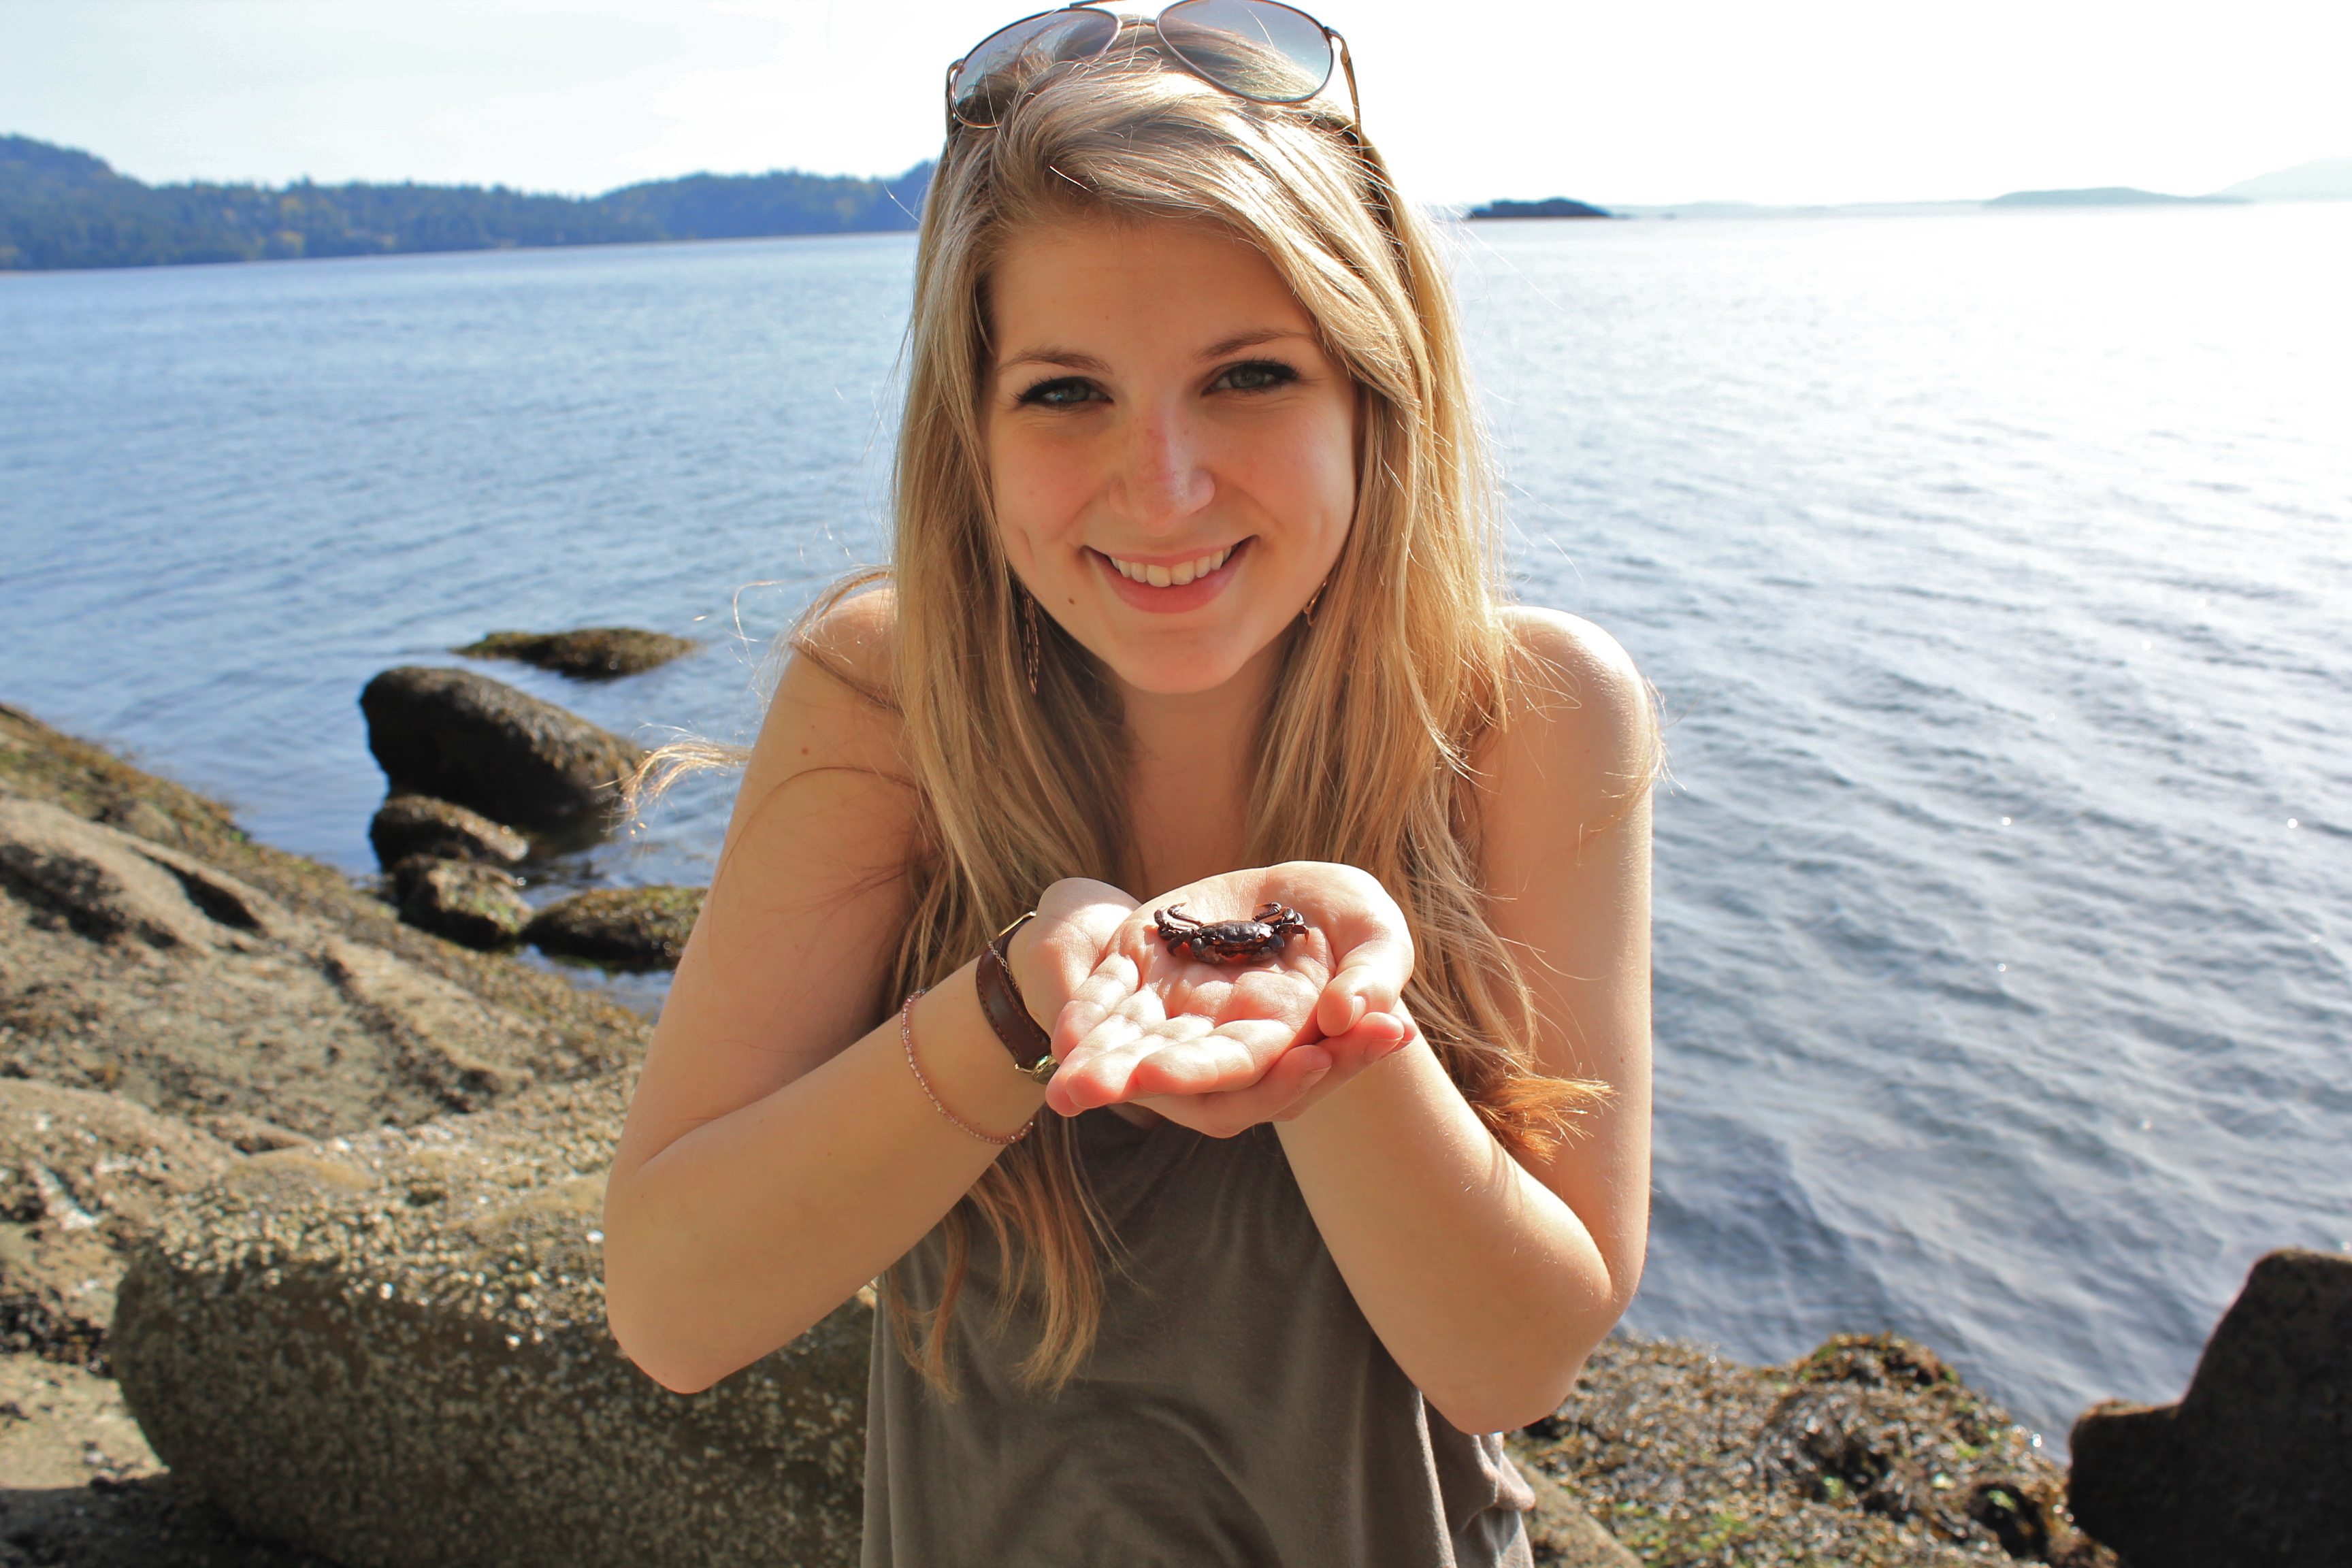 Portraint of Christine Hanley standing on a sunny beach and smiling, with hands outstretched towards the camera presenting a small crab